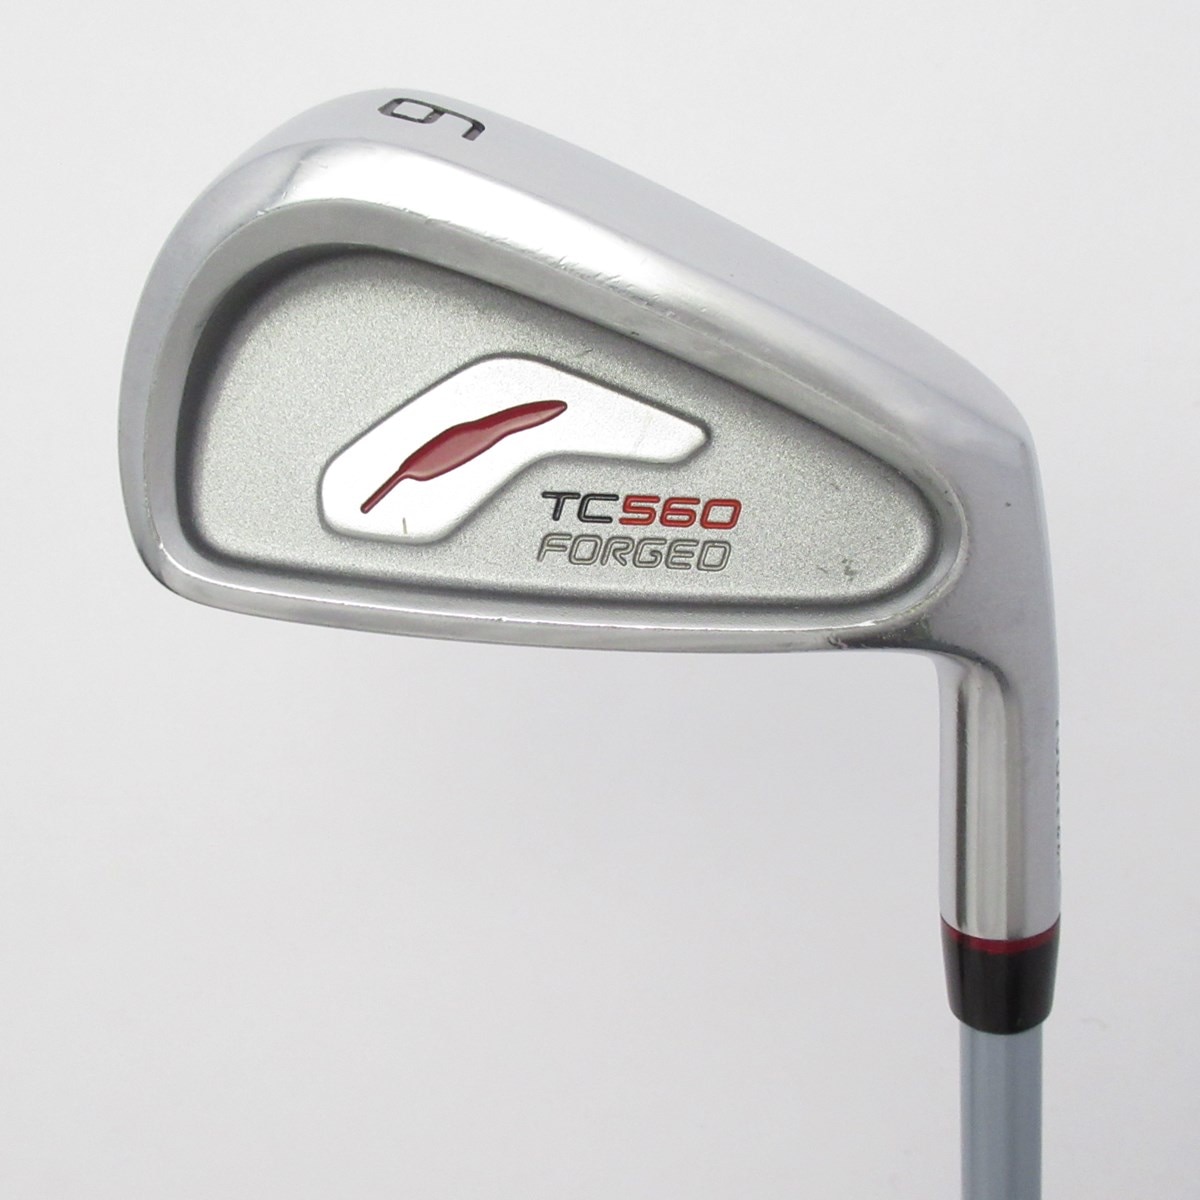 TC560  FORGED 7本セット＃フォーチィーン